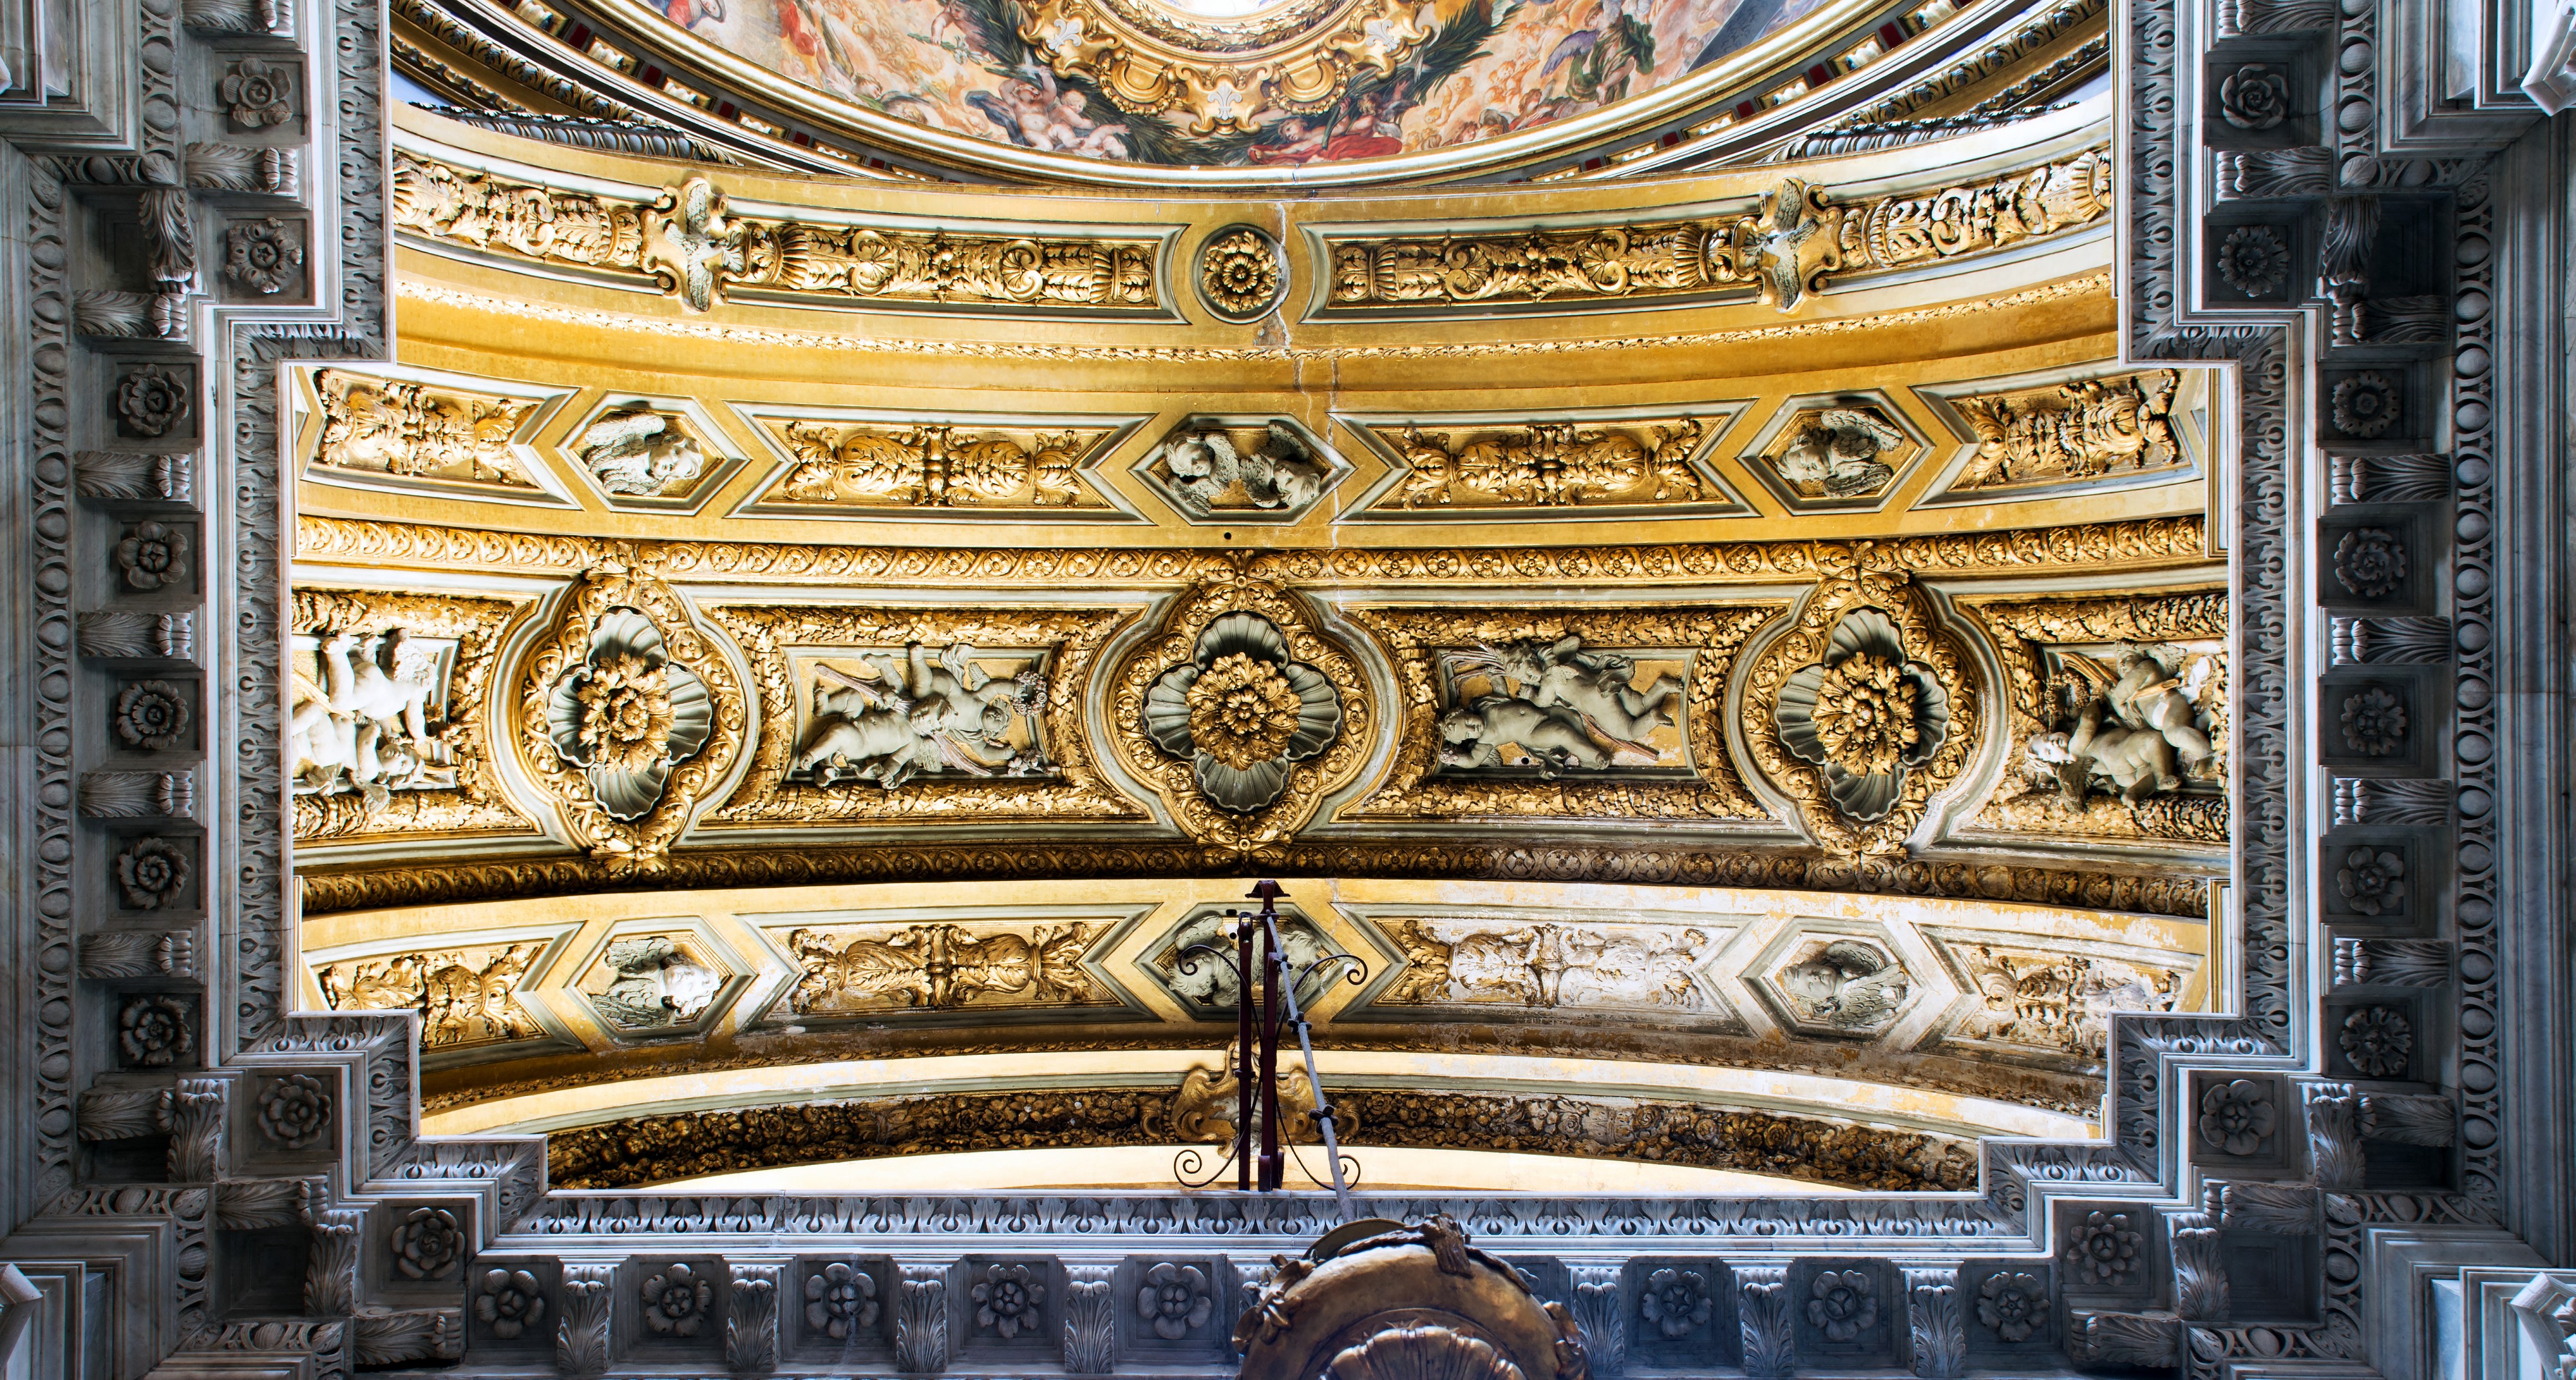 Ceiling decoration of the chapel Sant'Agnese in Agone (Rome)